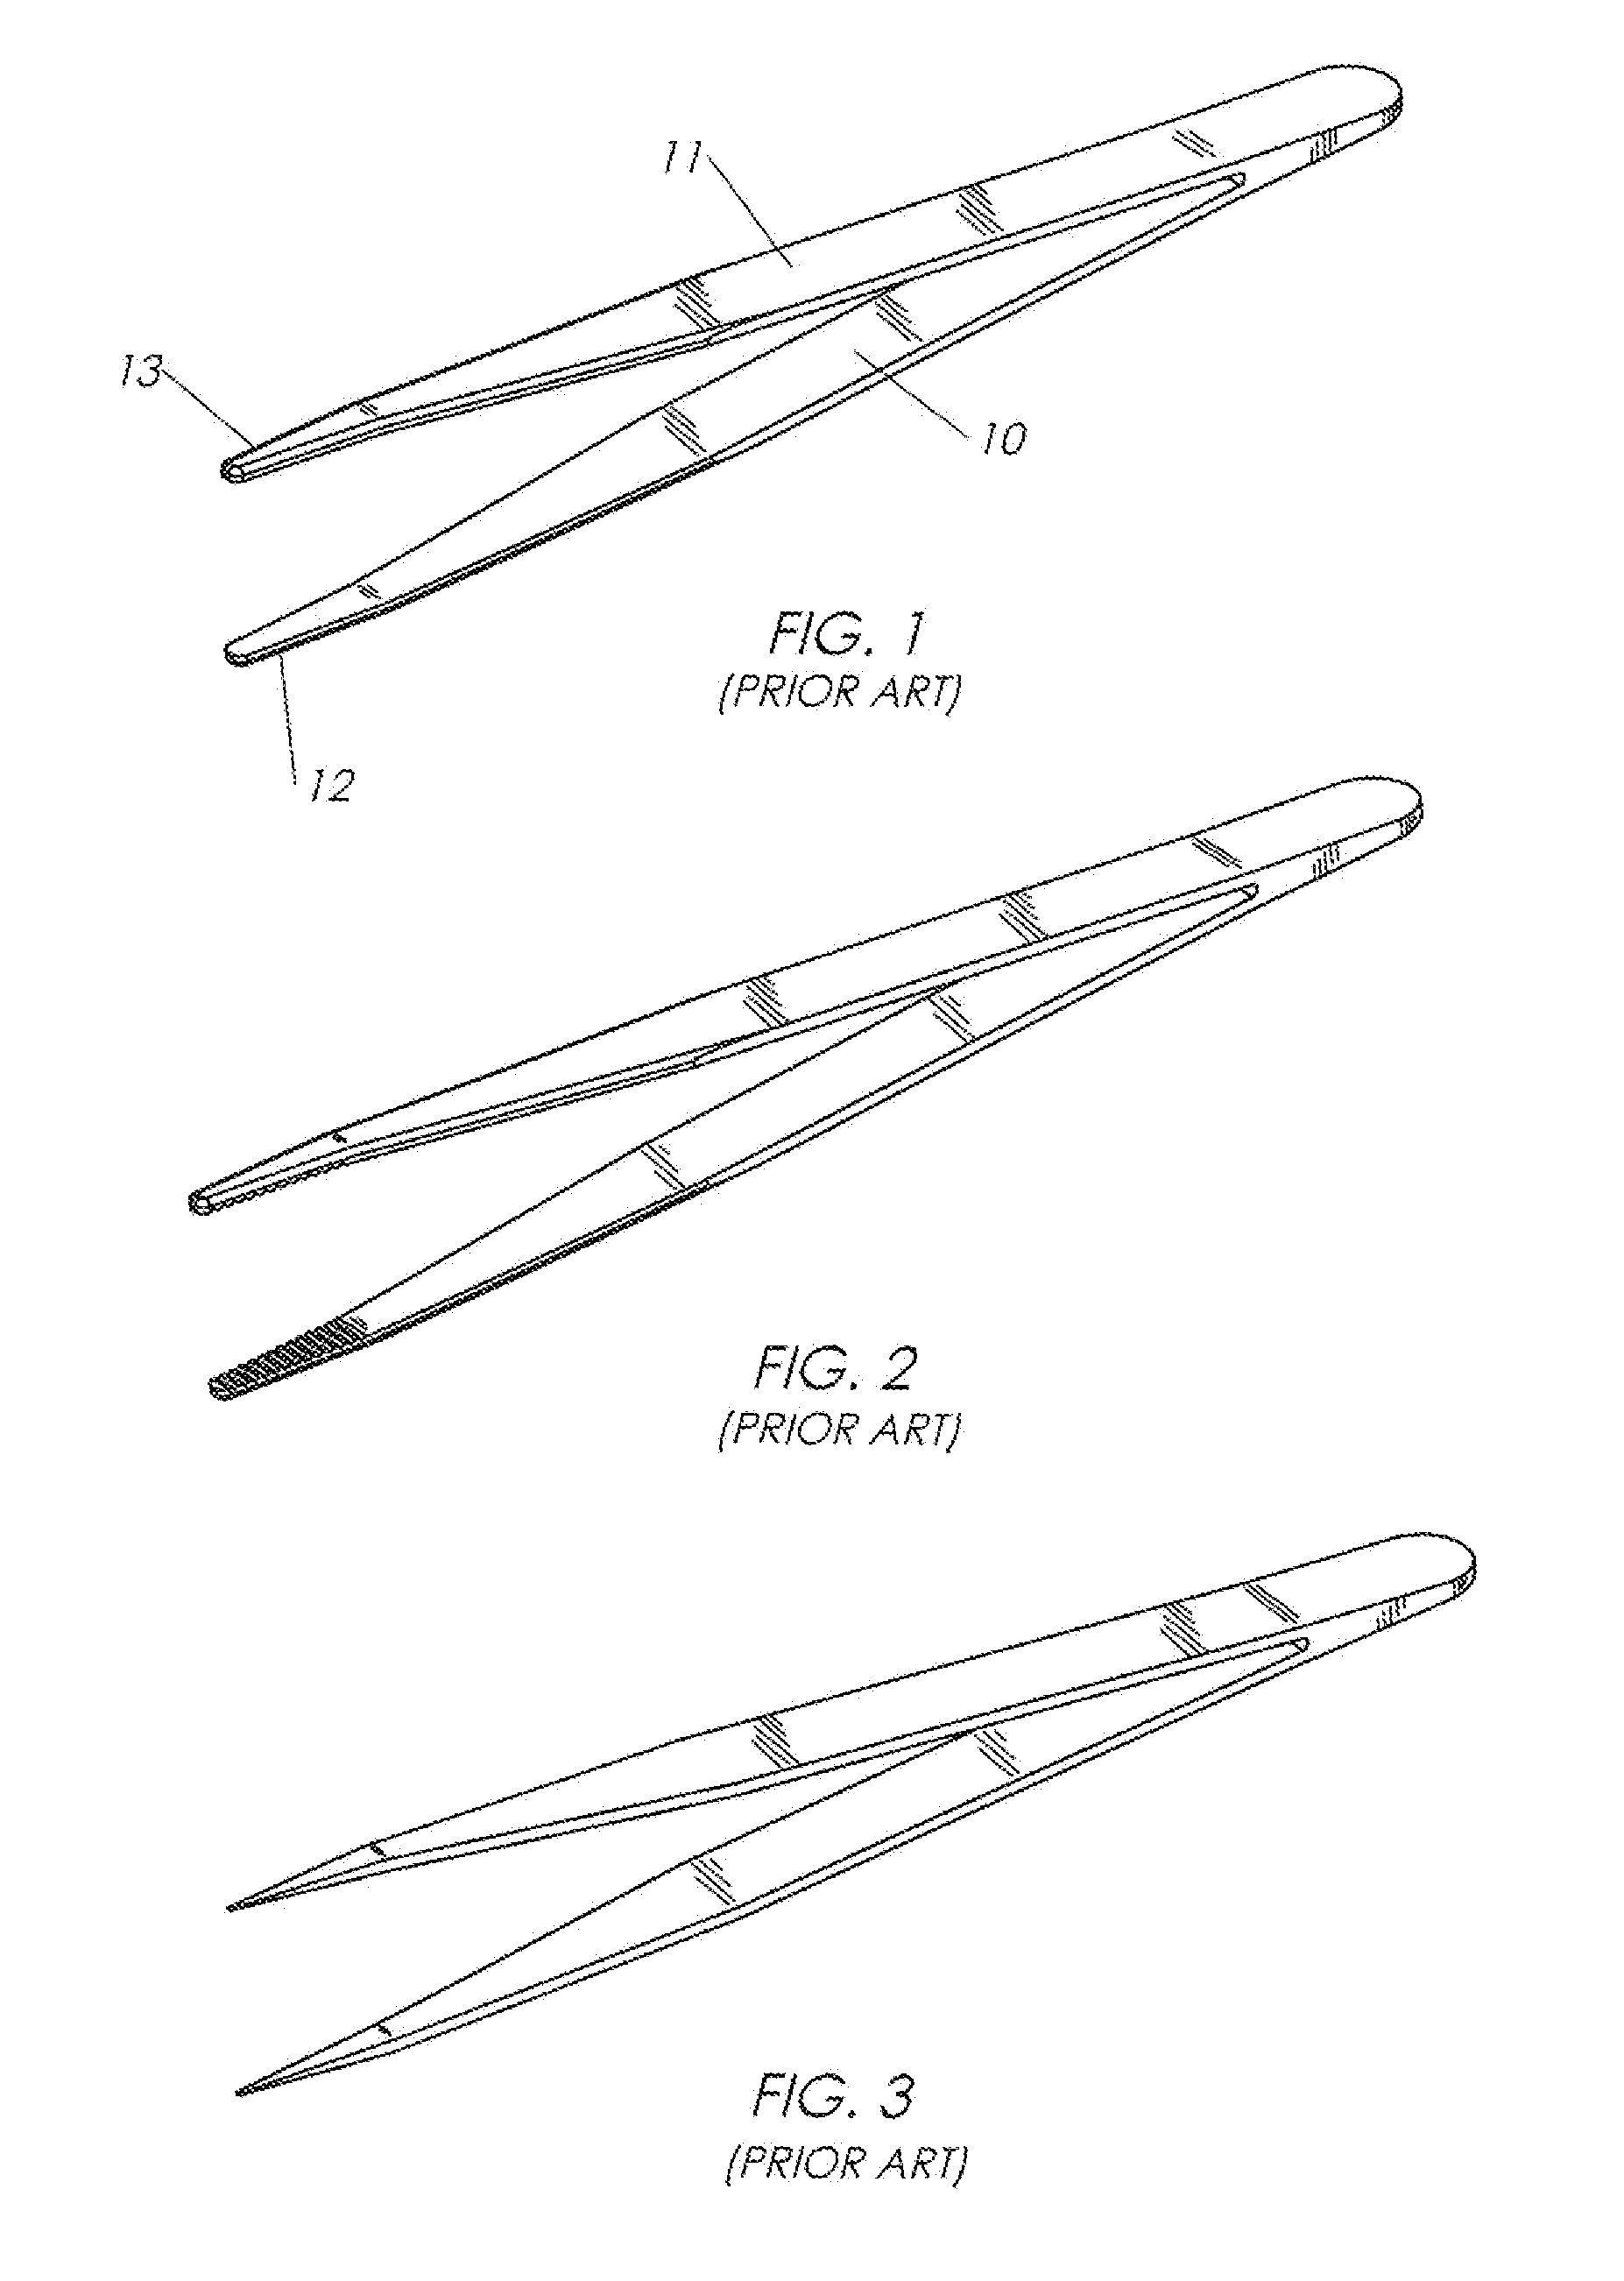 Tweezer Device Incorporating Improved Gripping Tip Structures, and Method of using